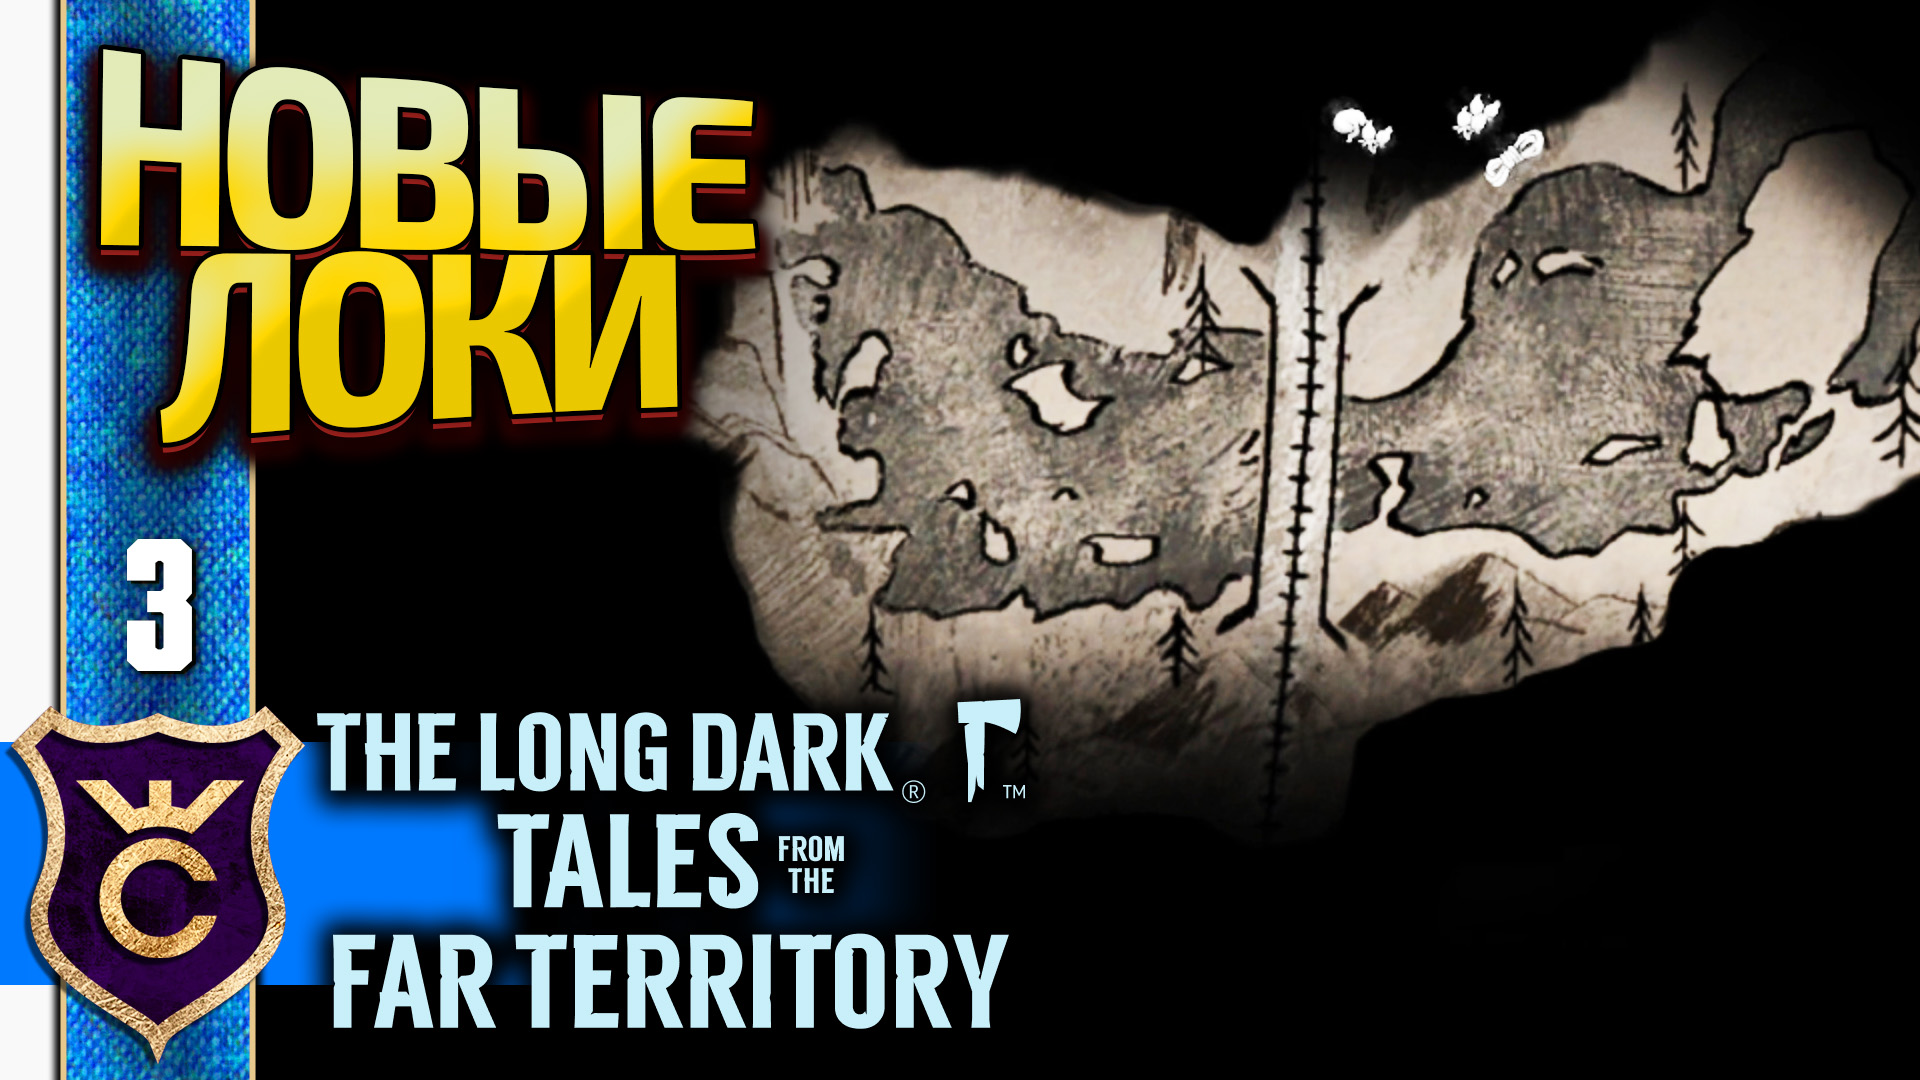 Tales from the far territory. The long Dark Tales from the far Territory карта. The long Dark: Tales from the far Territory карта локаций. The Darkest Tales карта локаций. The long Dark 3 эпизод карта.